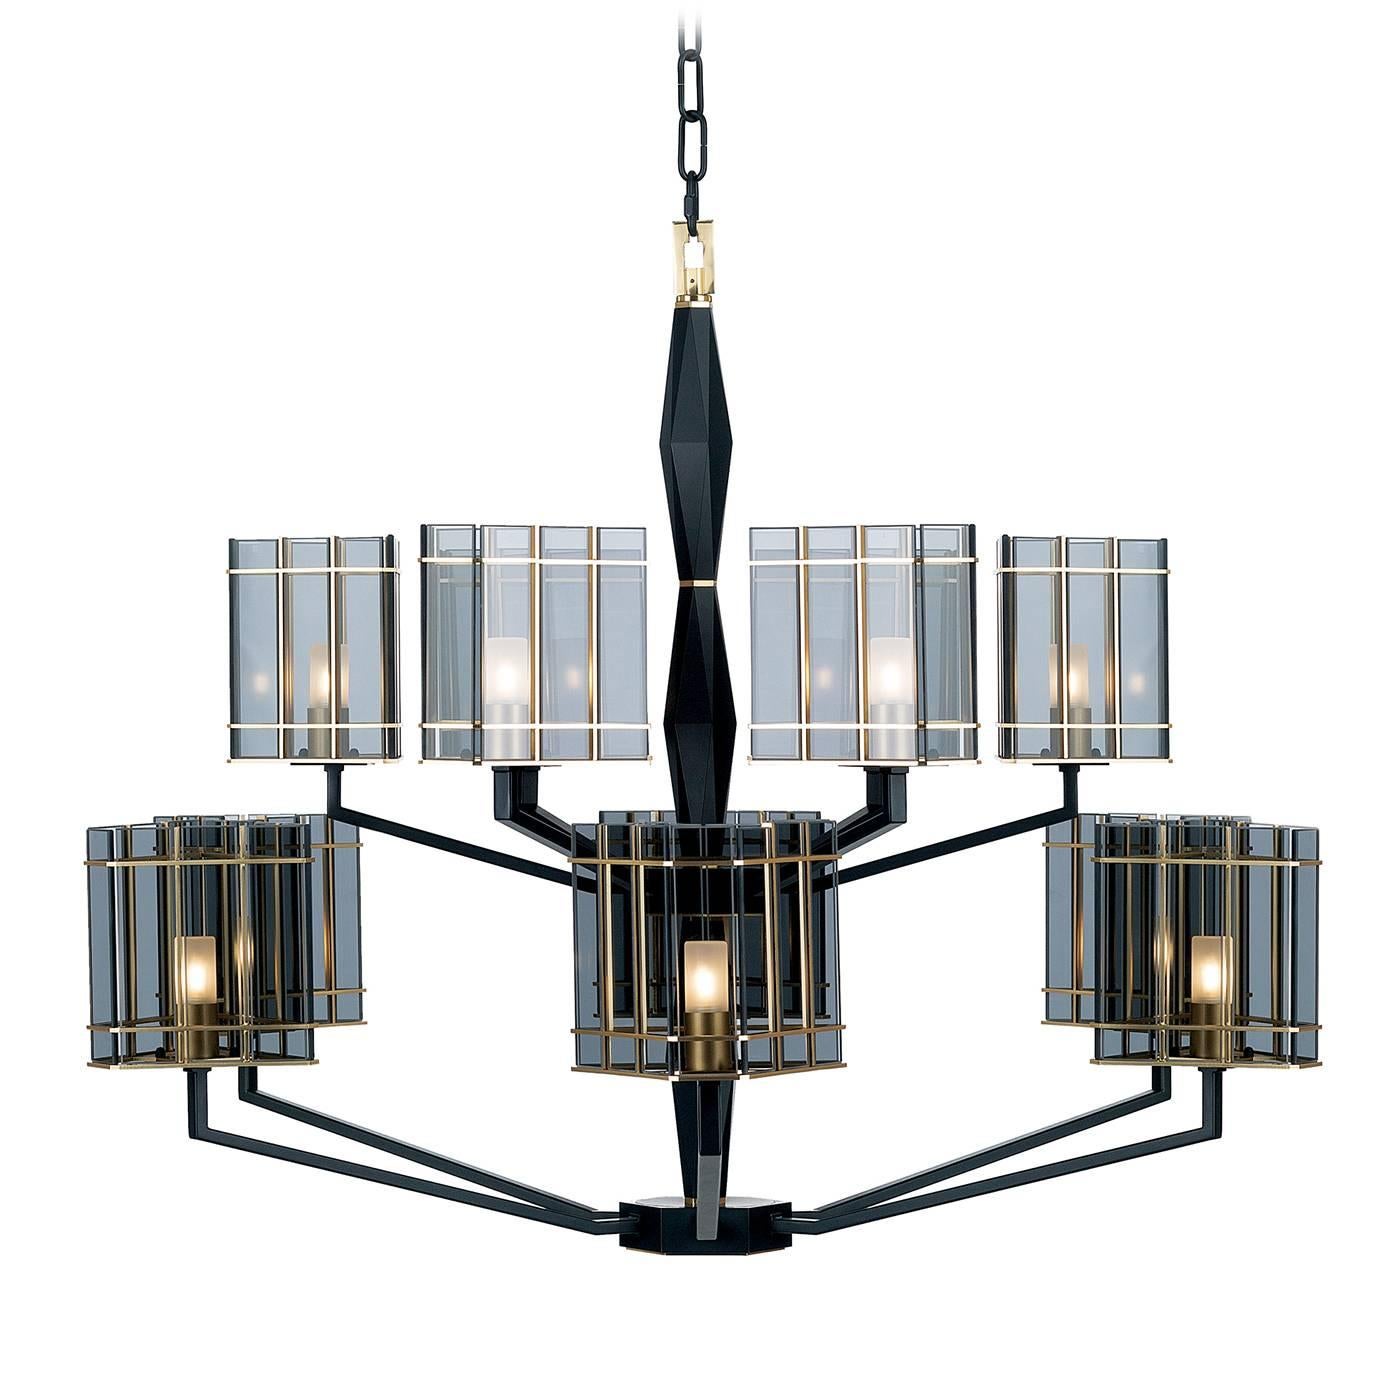 Top Glass Chandelier For Sale